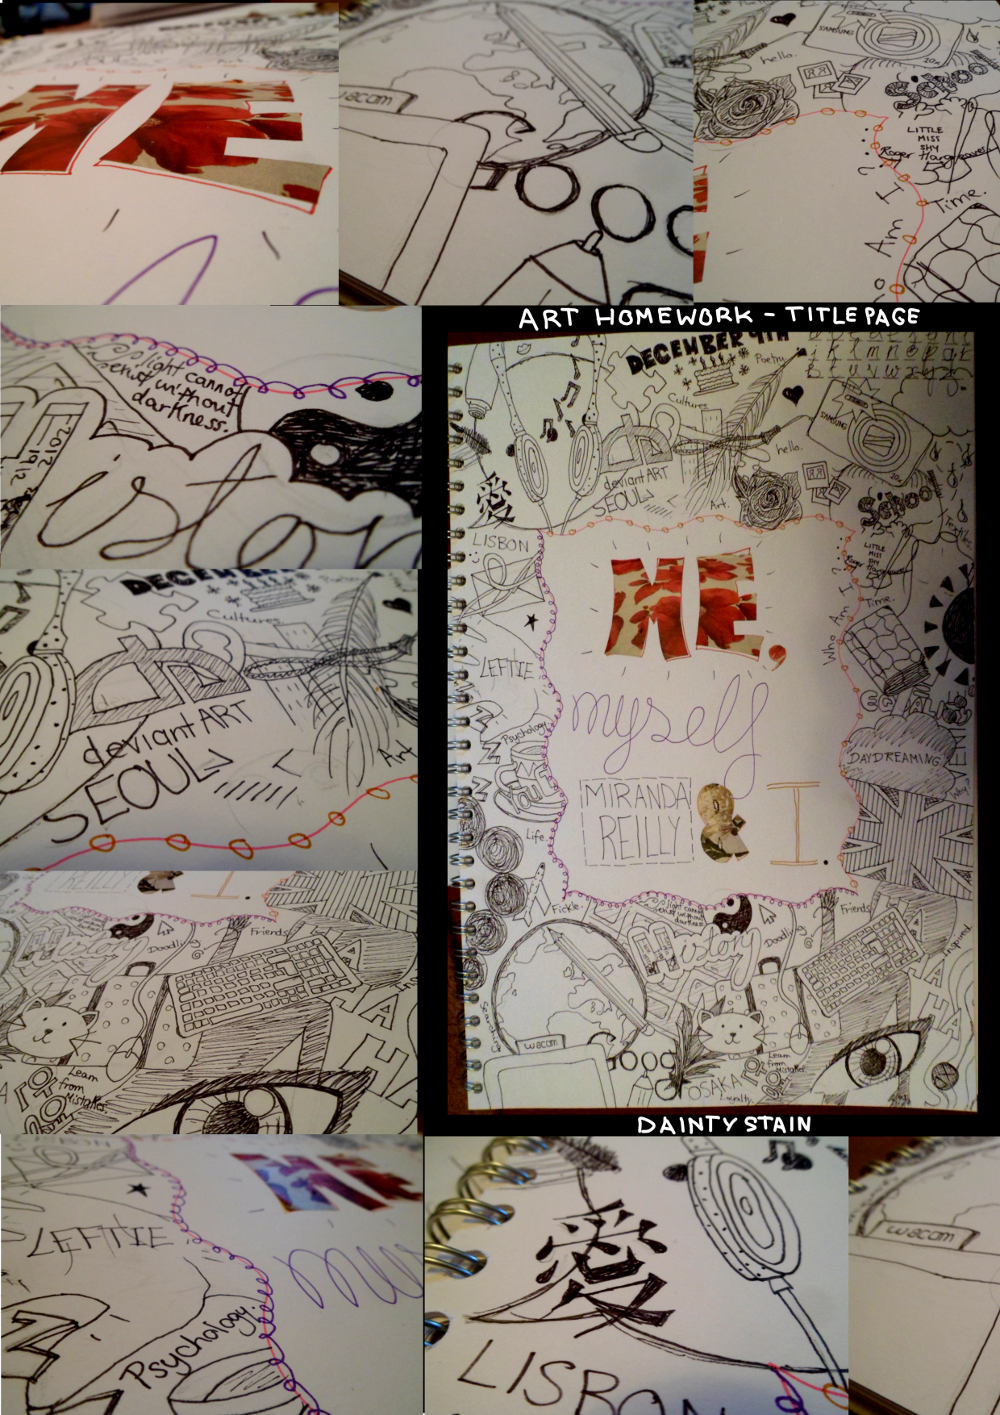 Gcse Art Year 10 Me Myself And I Title Page By Daintystain On Deviantart